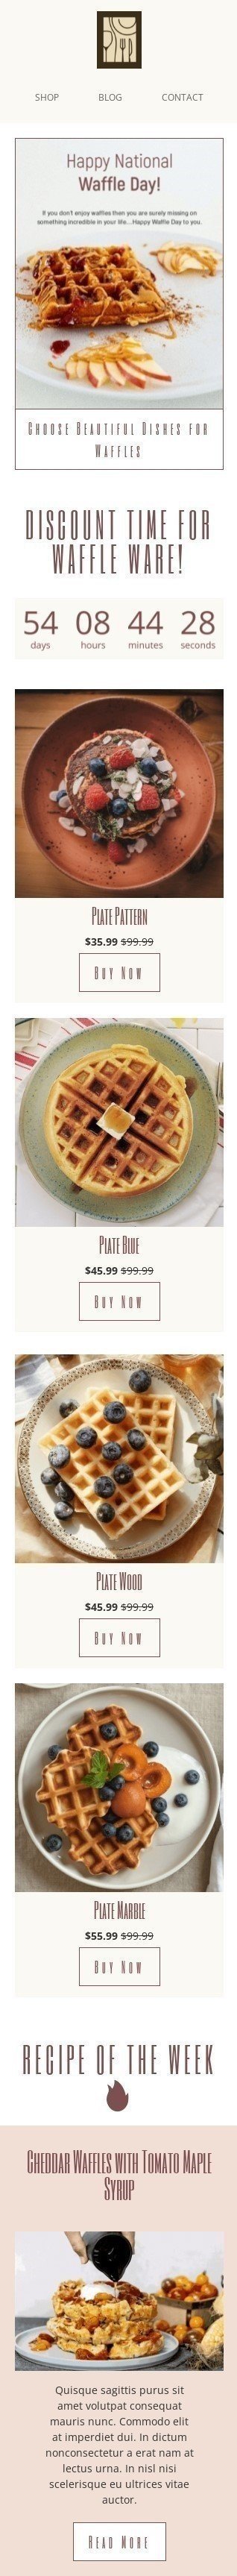 National Waffle Day Email Template "Choose beautiful dishes for waffles" for Furniture, Interior & DIY industry mobile view